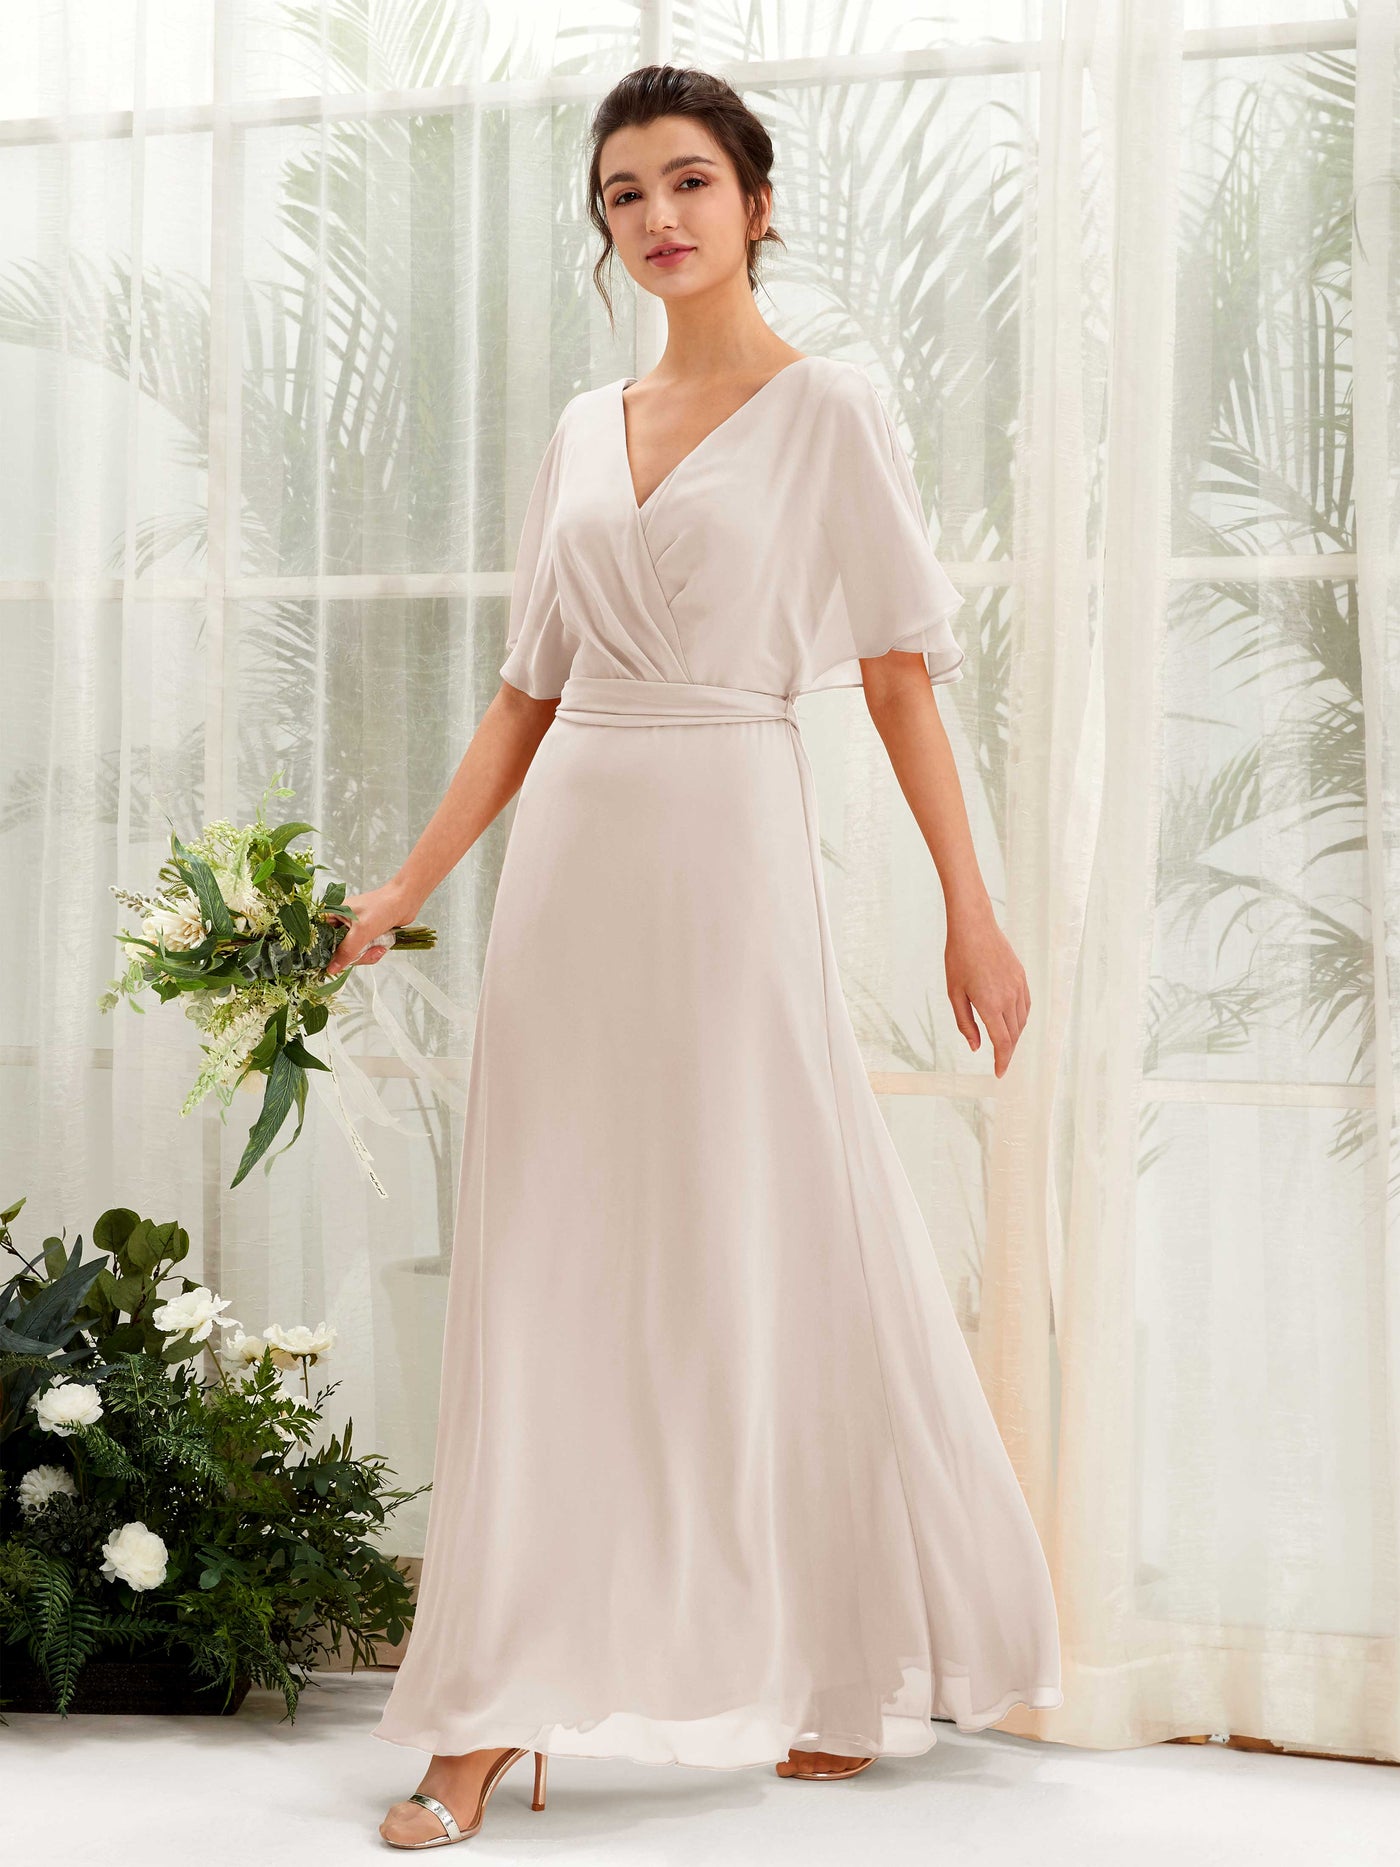 Champagne Bridesmaid Dresses Bridesmaid Dress A-line Chiffon V-neck Full Length Short Sleeves Wedding Party Dress (81222416)#color_champagne